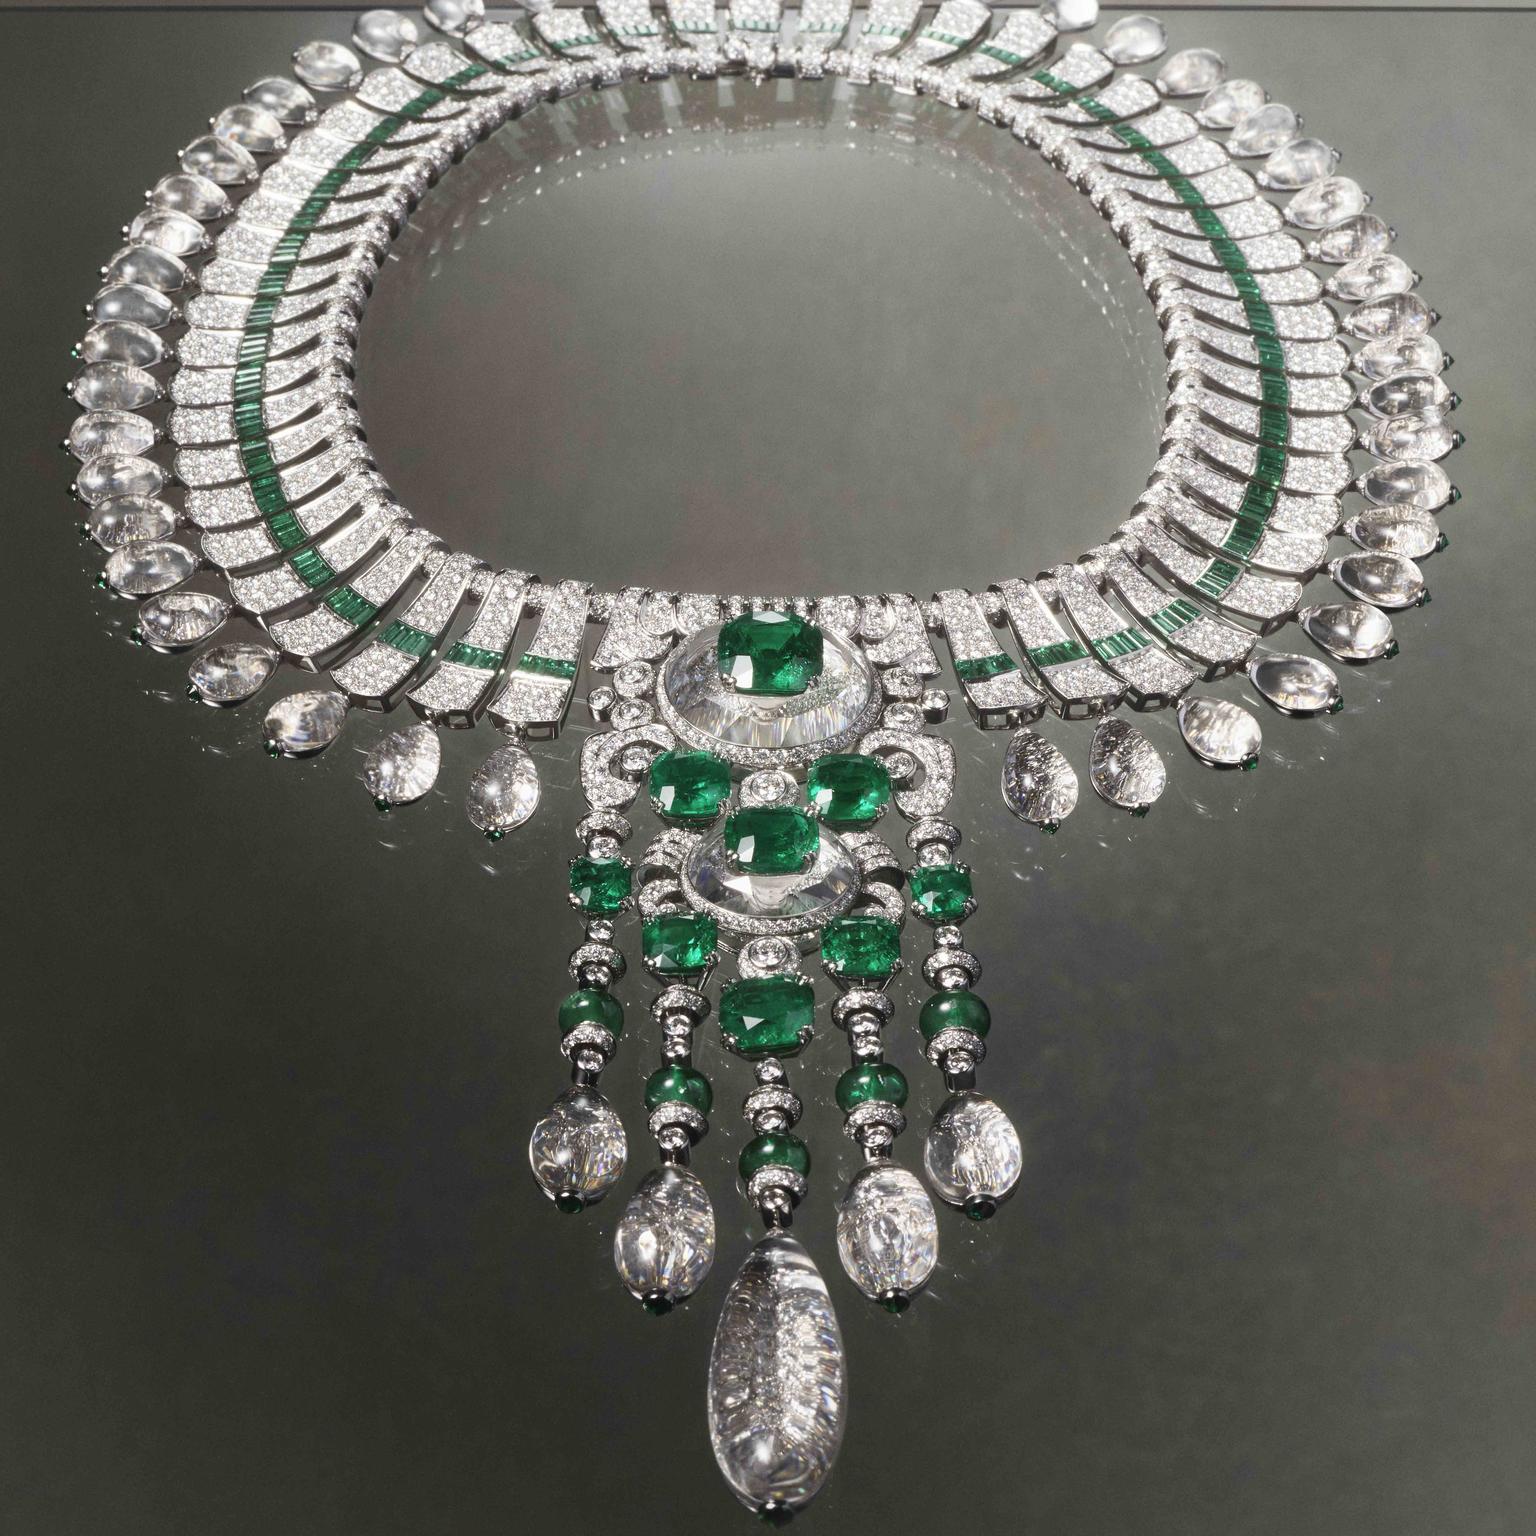 Top 12 High Jewellery collections from January 2022